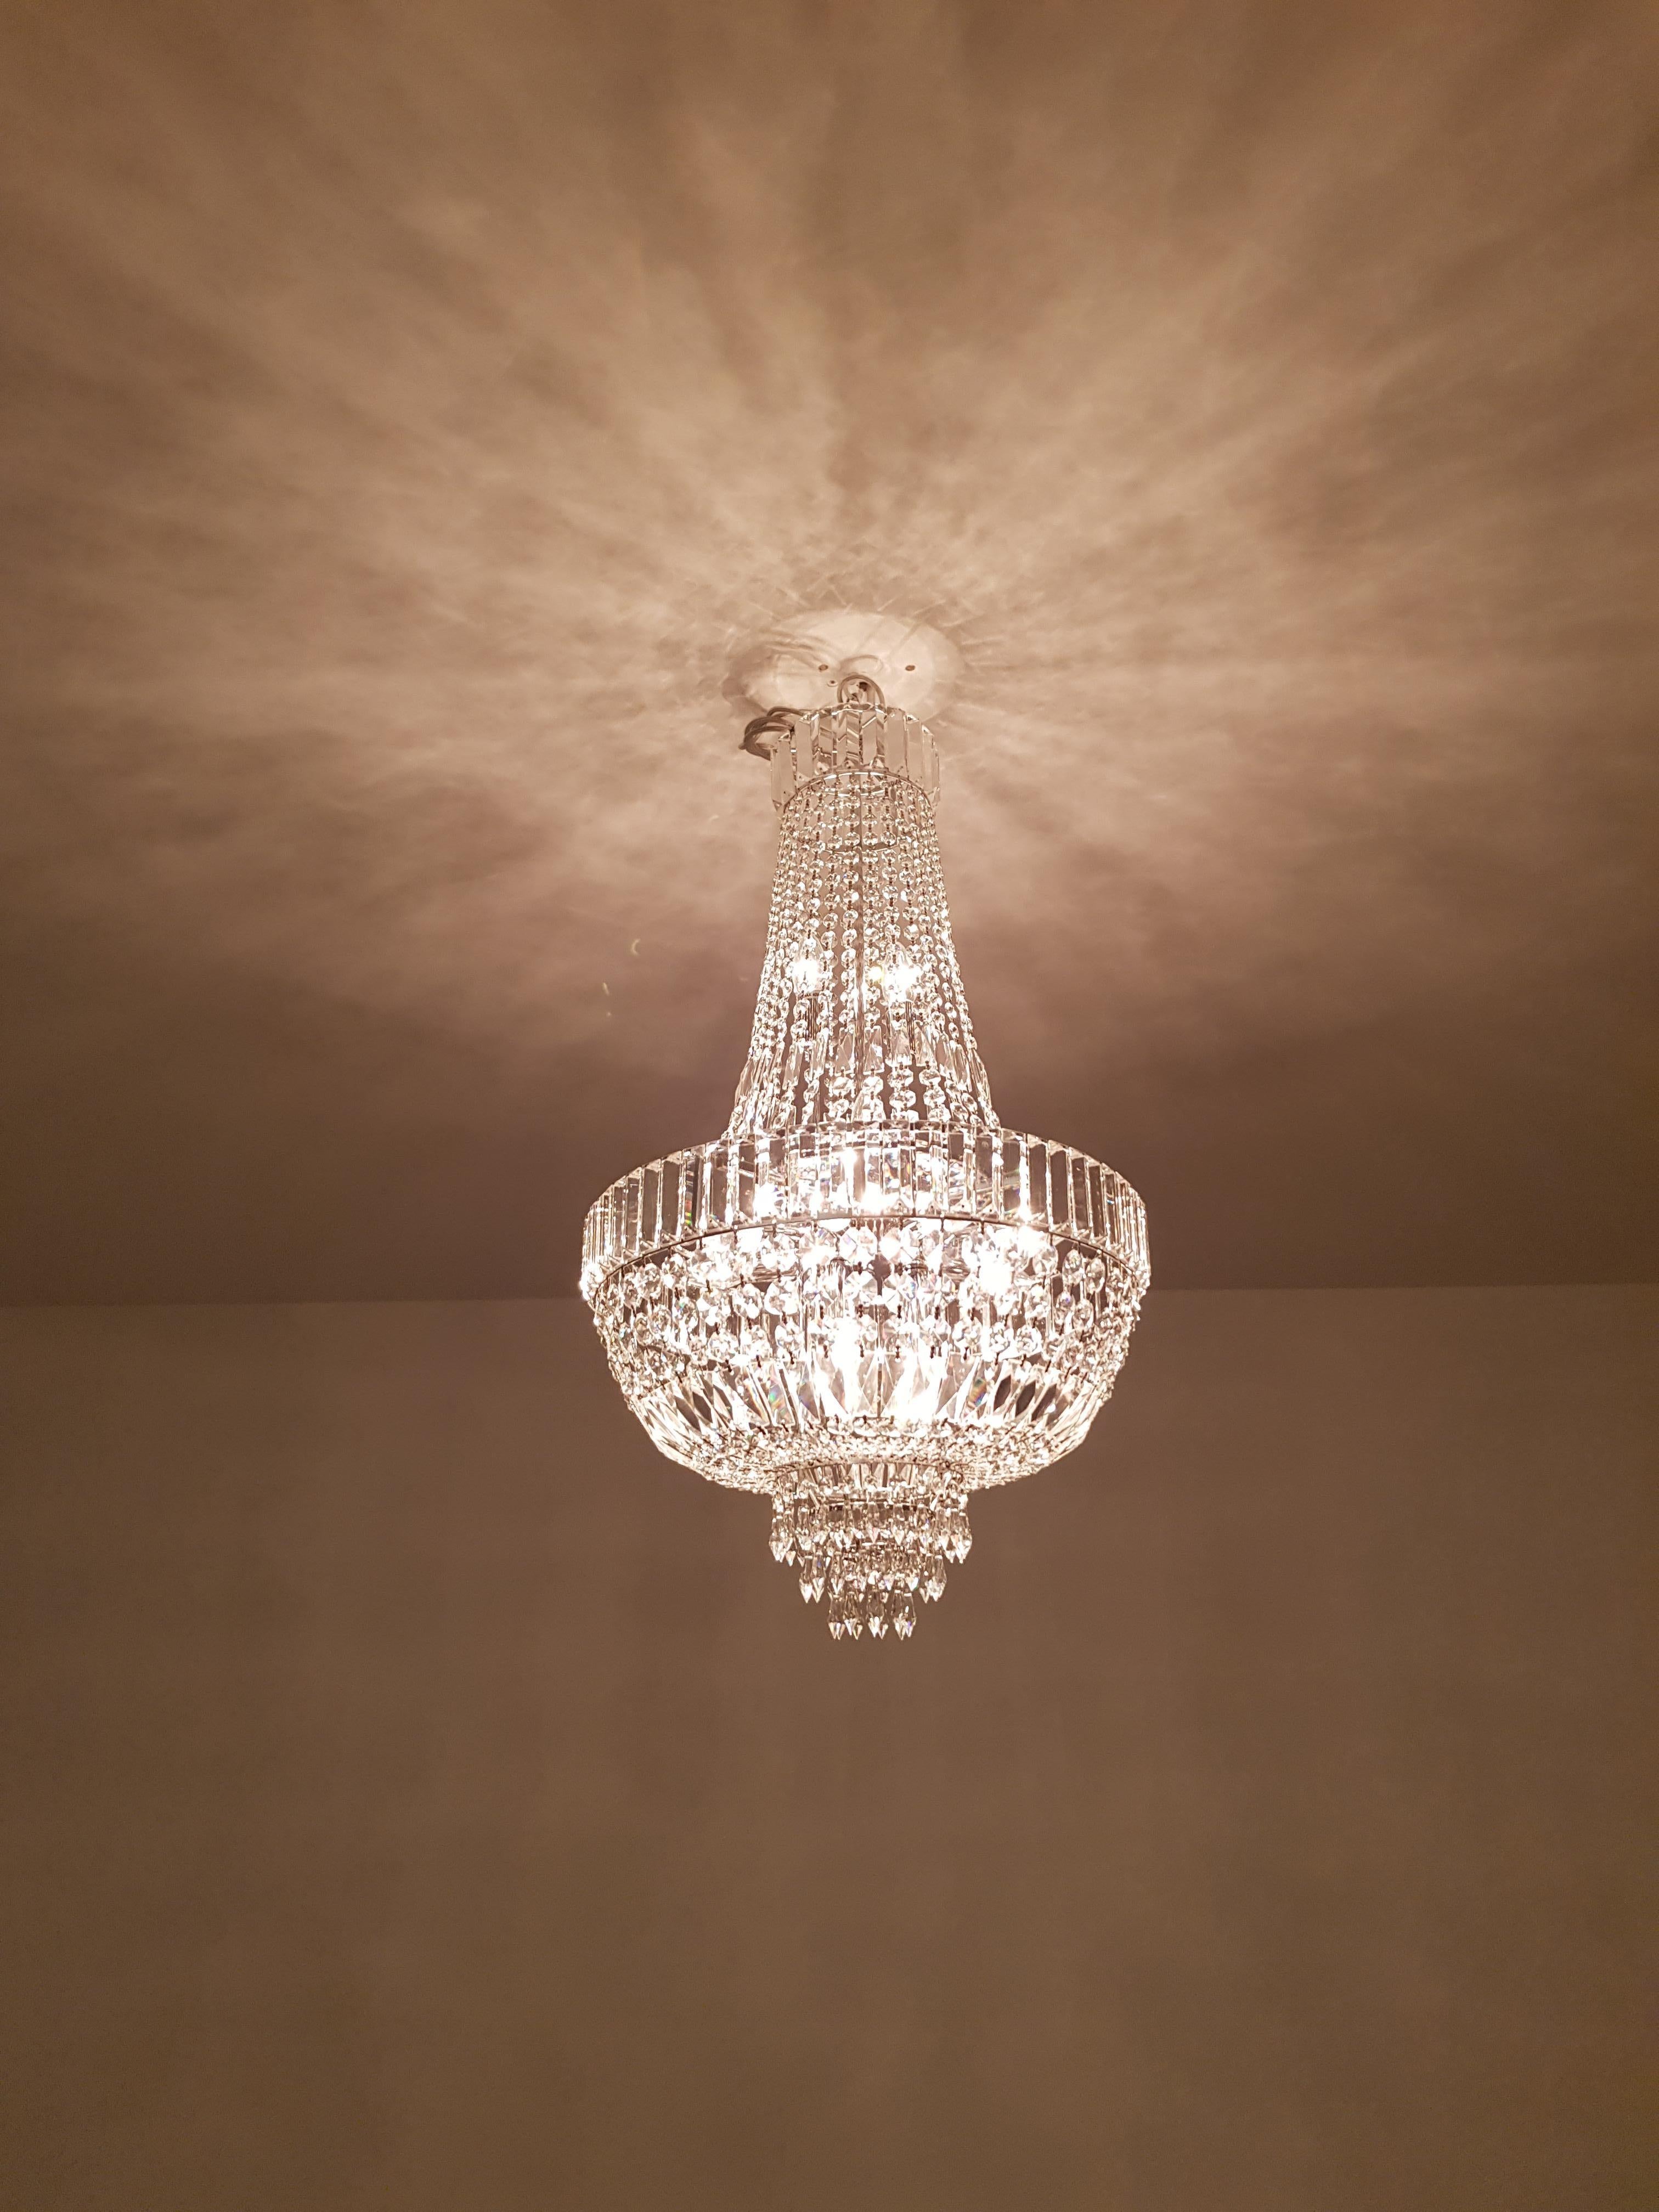 Art Deco Crystal Chandelier - Empire Elegance in Customizable Sizes

Introducing a new Art Deco crystal style chandelier that captures the grandeur of the Empire era while offering modern sophistication. Crafted with exquisite lead crystal, this